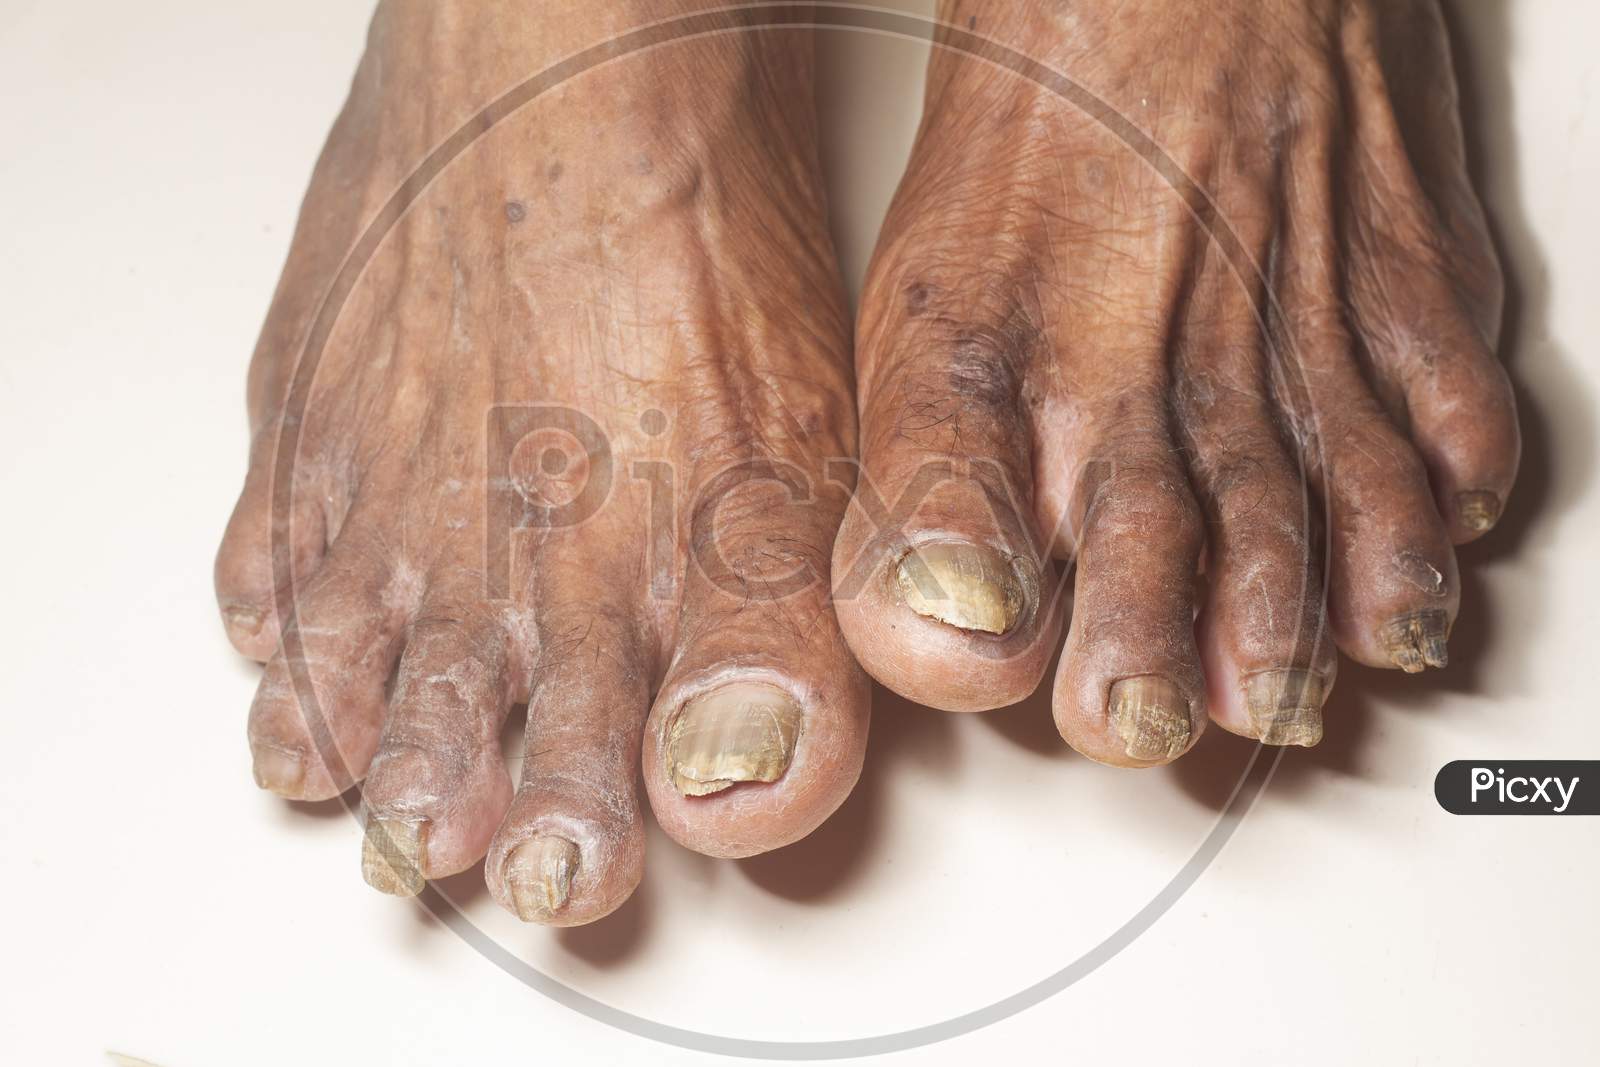 Fungus Infection On Nails Of Old Woman'S Foot